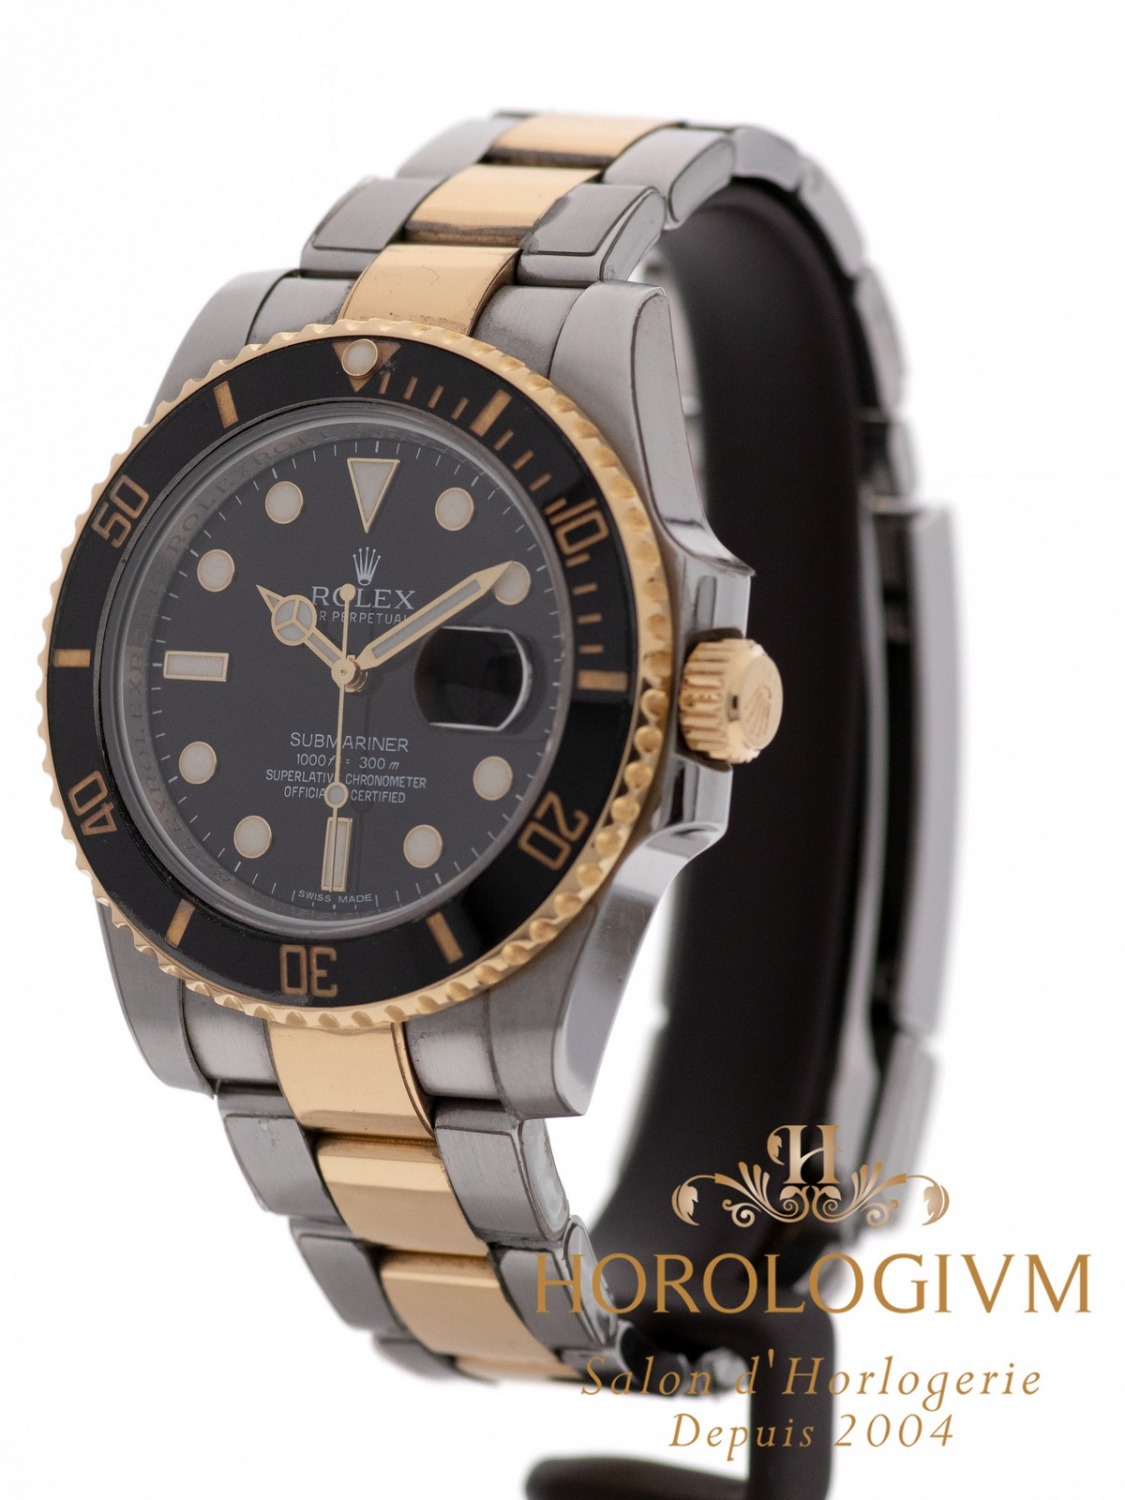 Rolex Submariner Date Two-Tone 40MM Ref. 116613LN watch, two-tone (bi-colored) silver and yellow gold